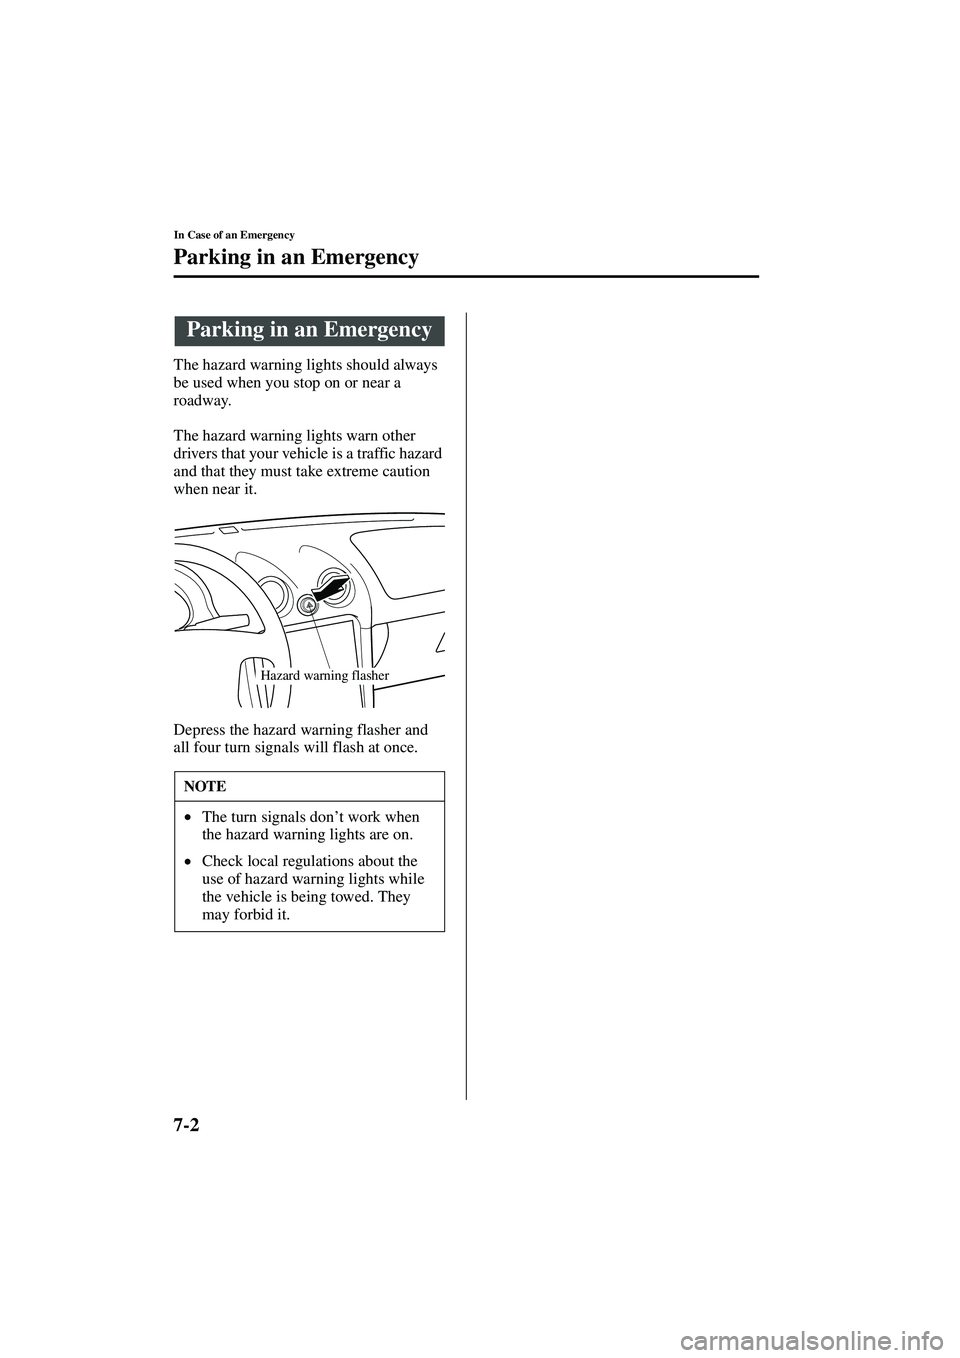 MAZDA MODEL MX-5 MIATA 2004 User Guide 7-2
In Case of an Emergency
Form No. 8S15-EA-03G
Parking in an Emergency
The hazard warning lights should always 
be used when you stop on or near a 
roadway.
The hazard warning lights warn other 
dri